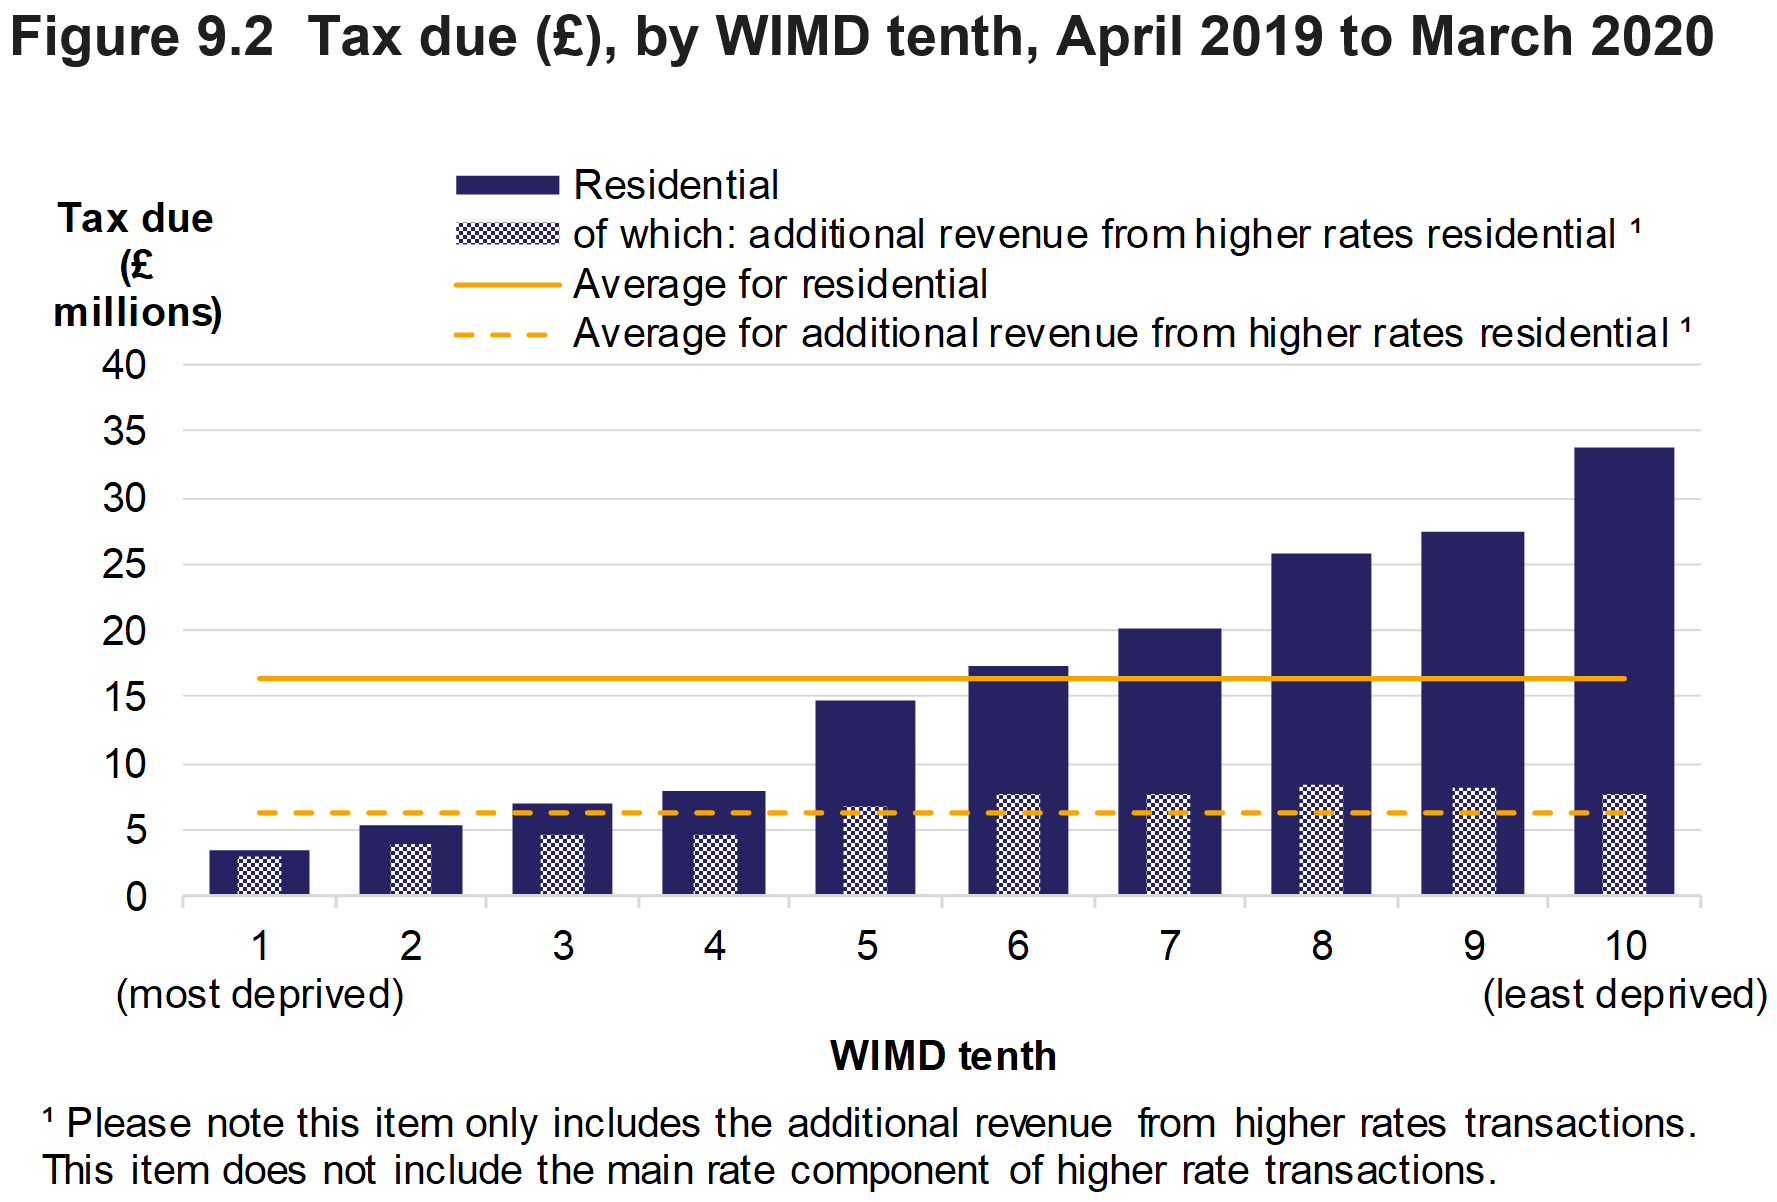 Figure 9.2 shows the amount of tax due on residential transactions and additional revenue from the higher rates, by WIMD tenth, for April 2019 to March 2020. Average values over all WIMD tenths are also presented.